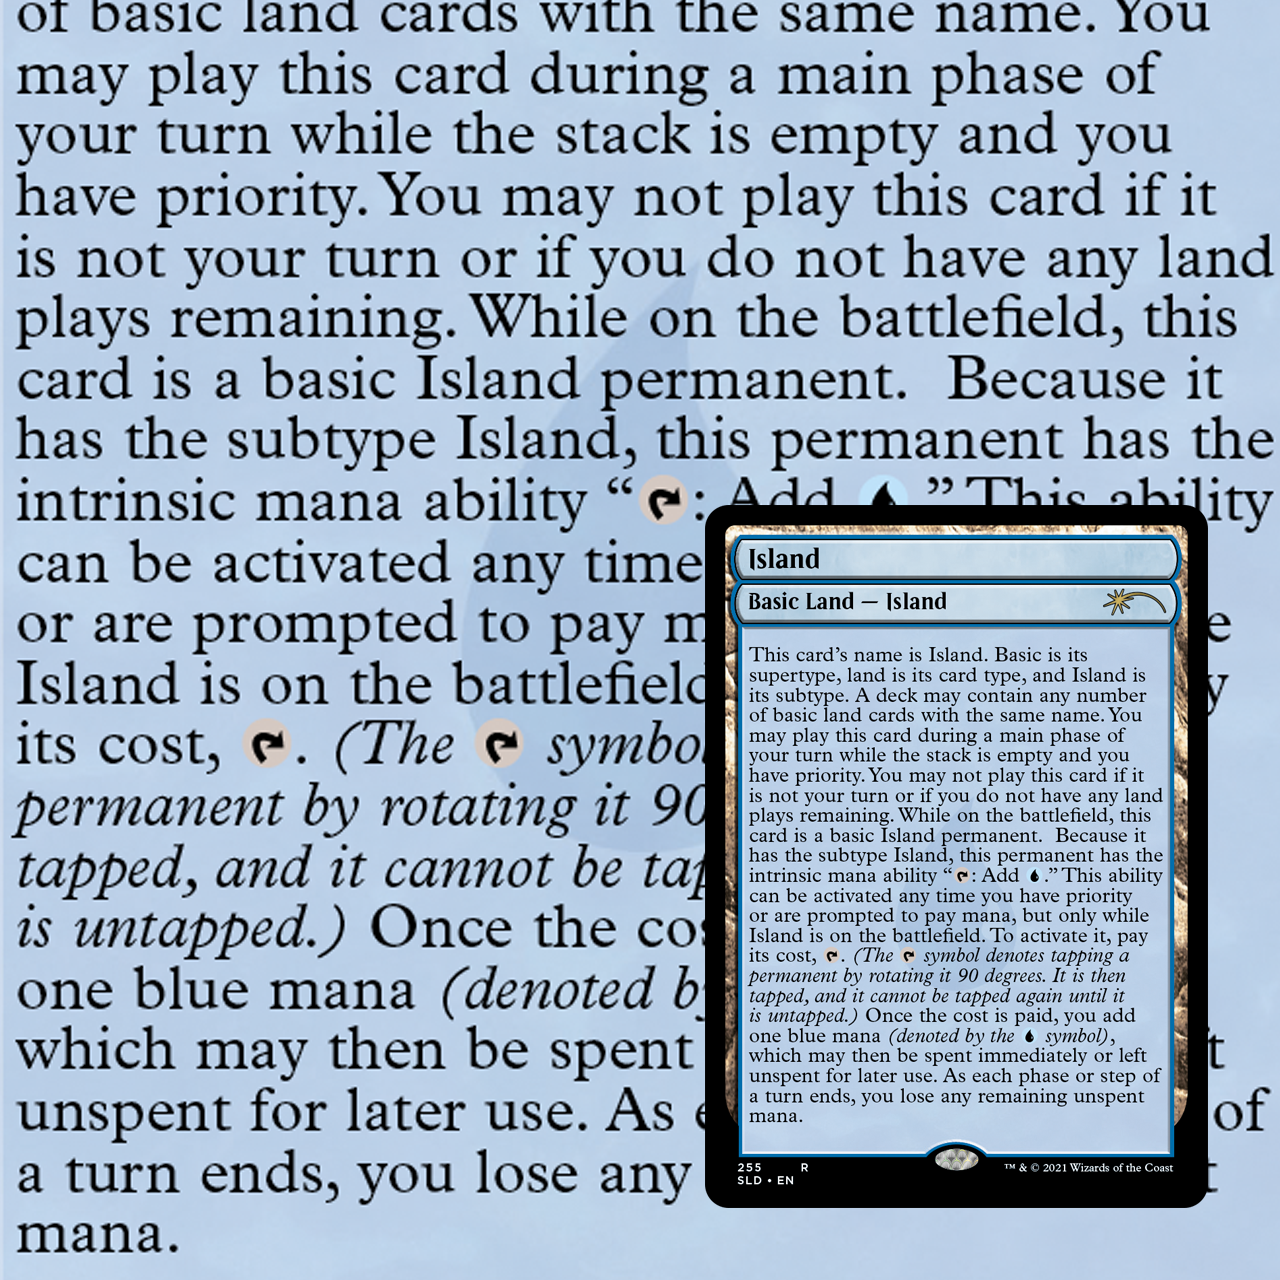 The Full-Text Lands